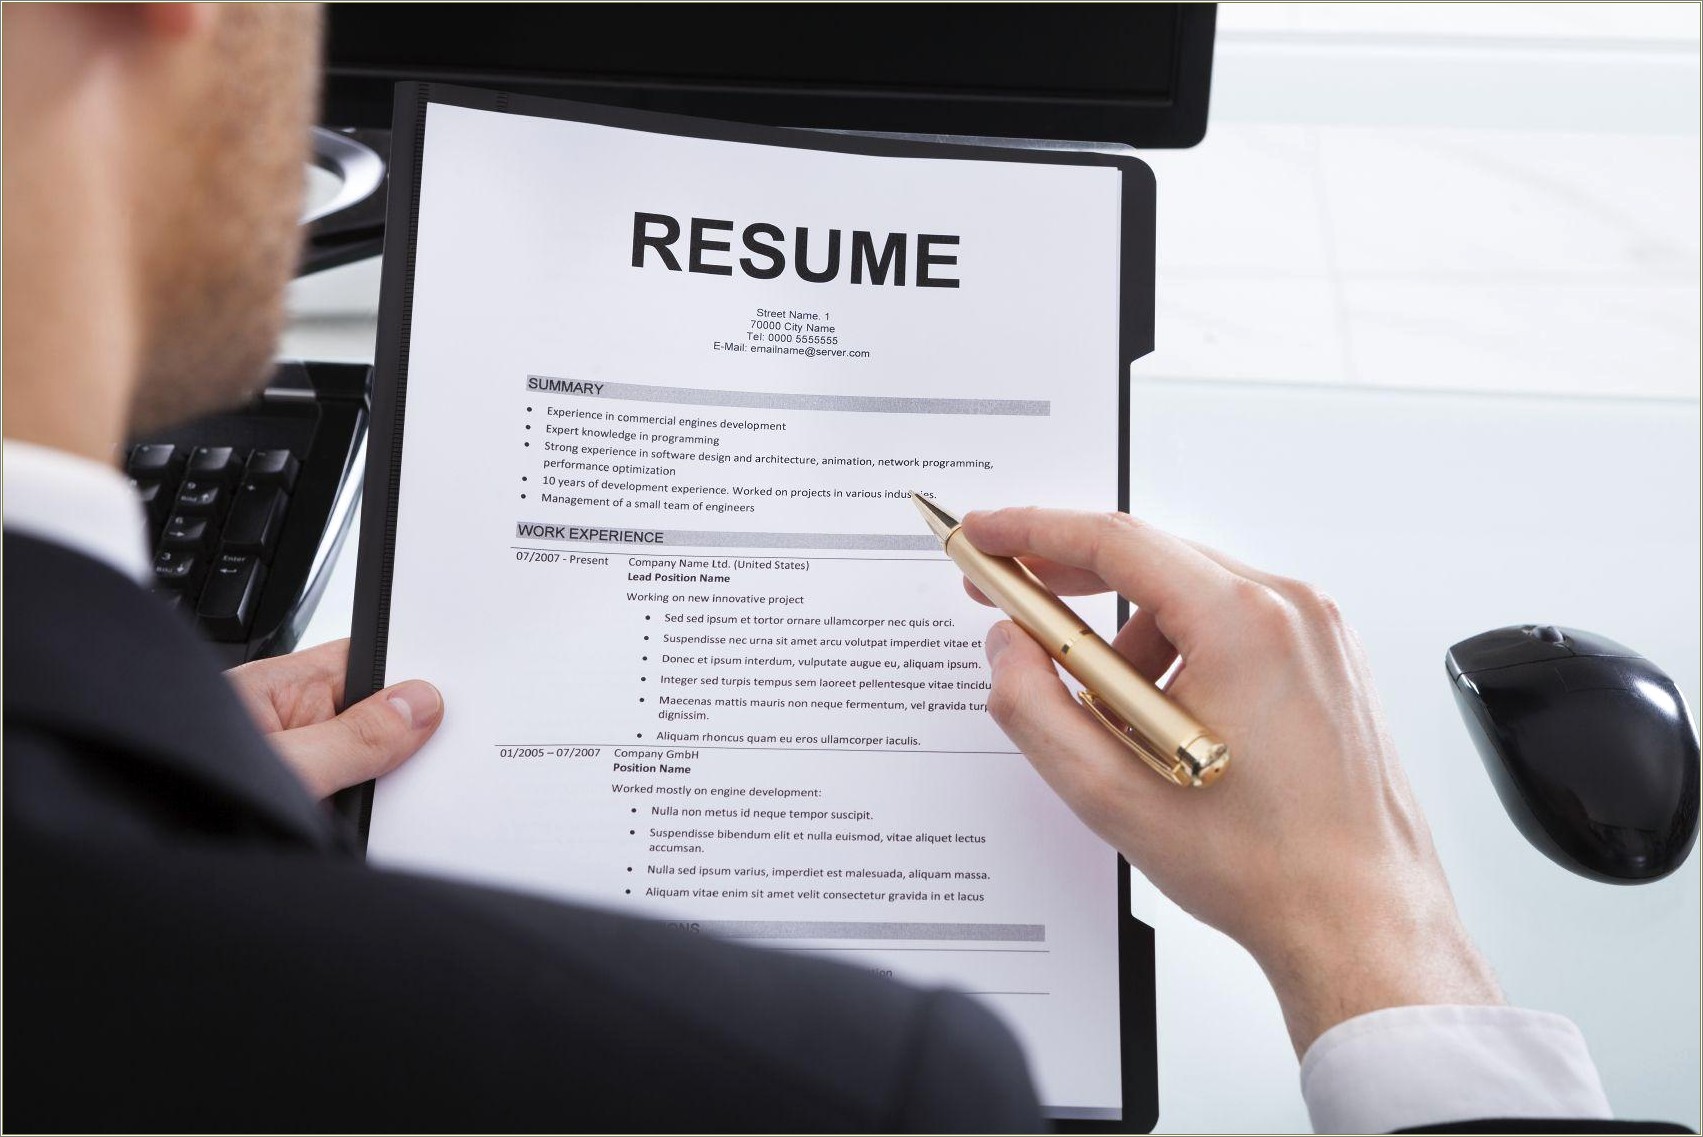 Good Points To Add In Resume